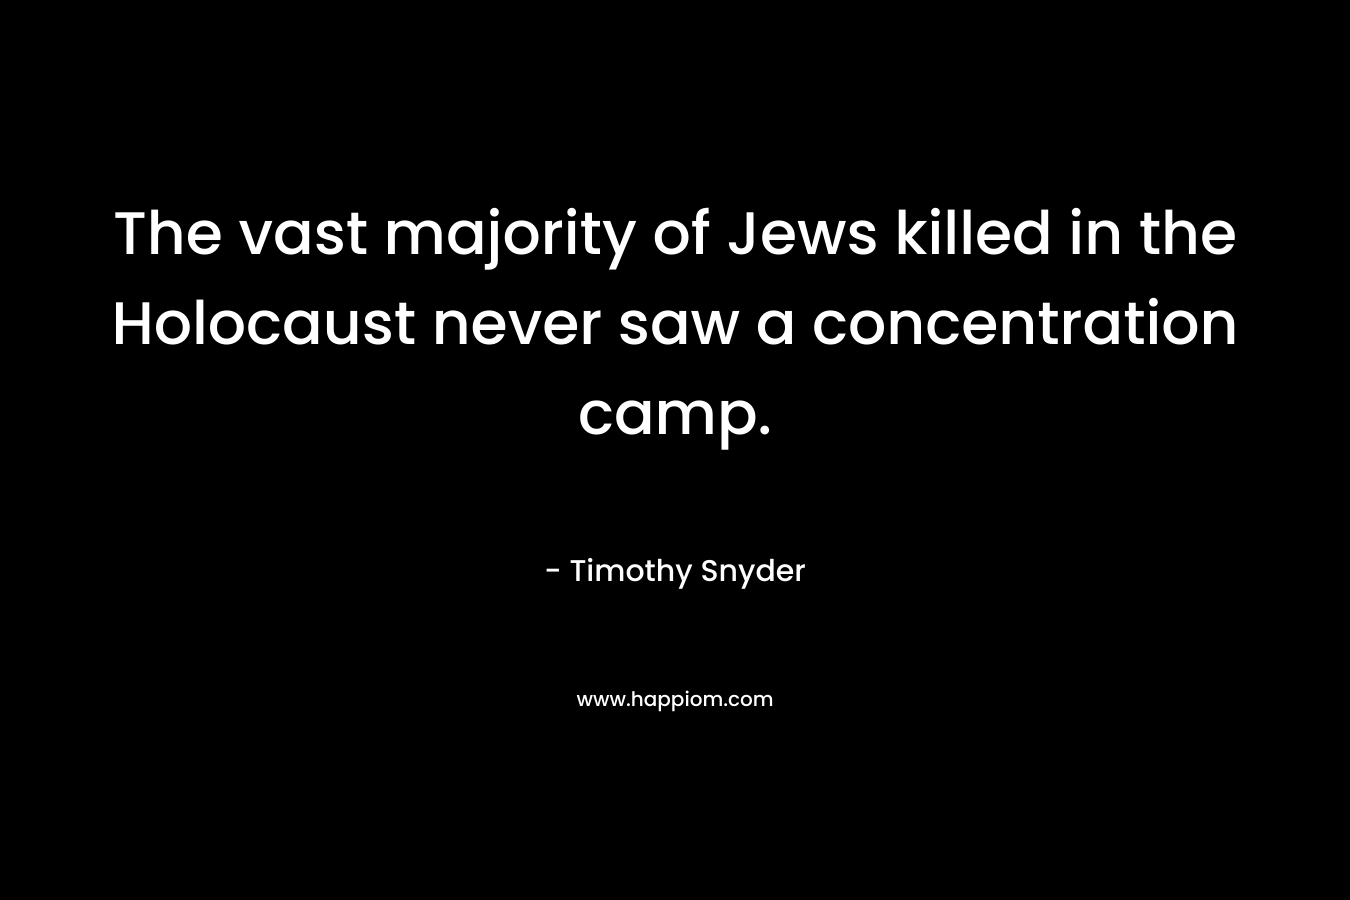 The vast majority of Jews killed in the Holocaust never saw a concentration camp.